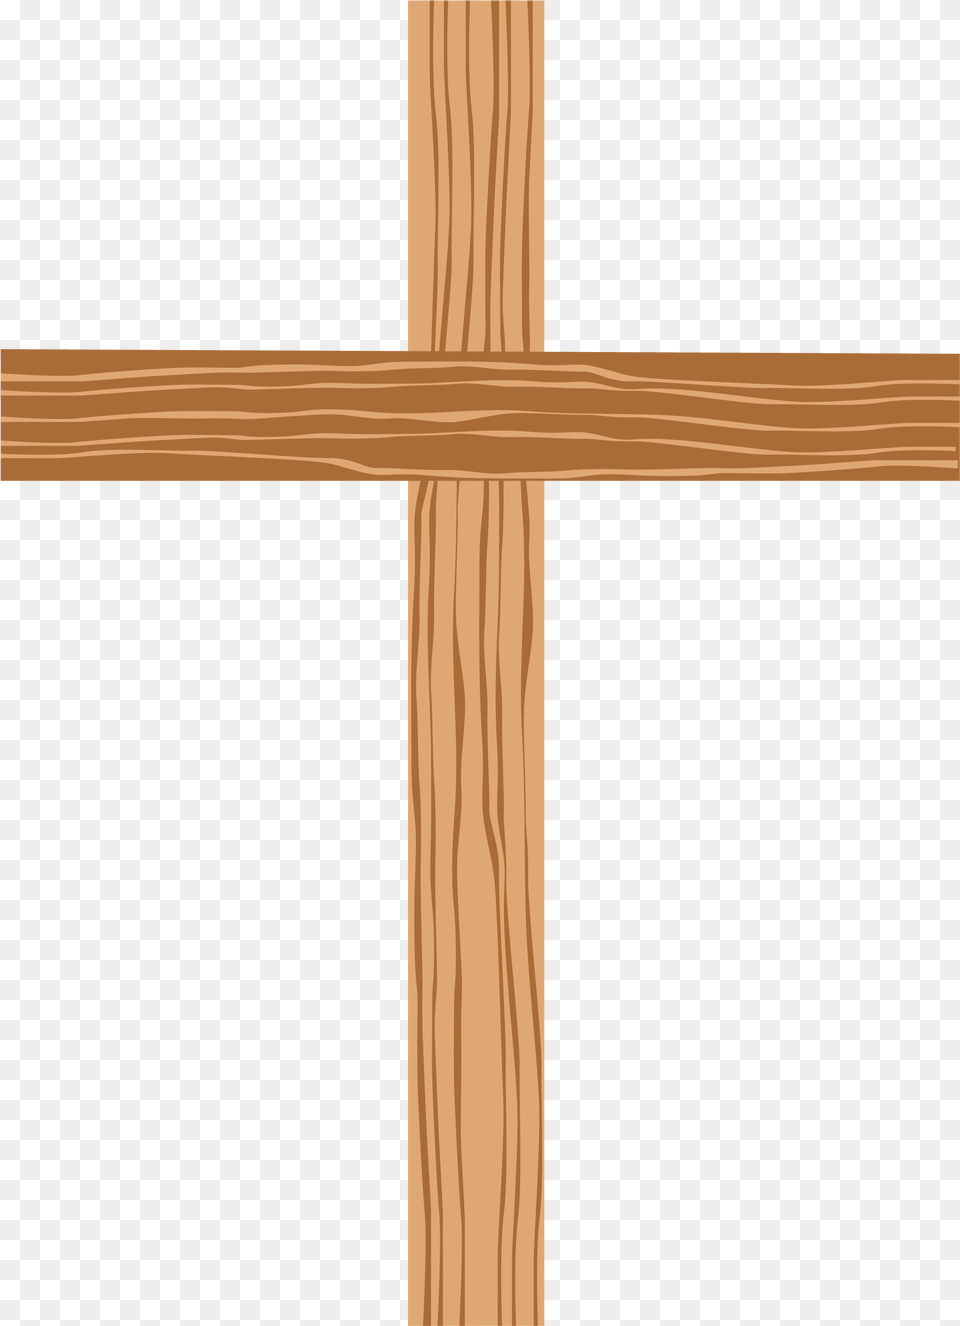 Download Christian Cross Hd Wooden Cross Clipart, Symbol, Wood, Plywood, Hardwood Png Image